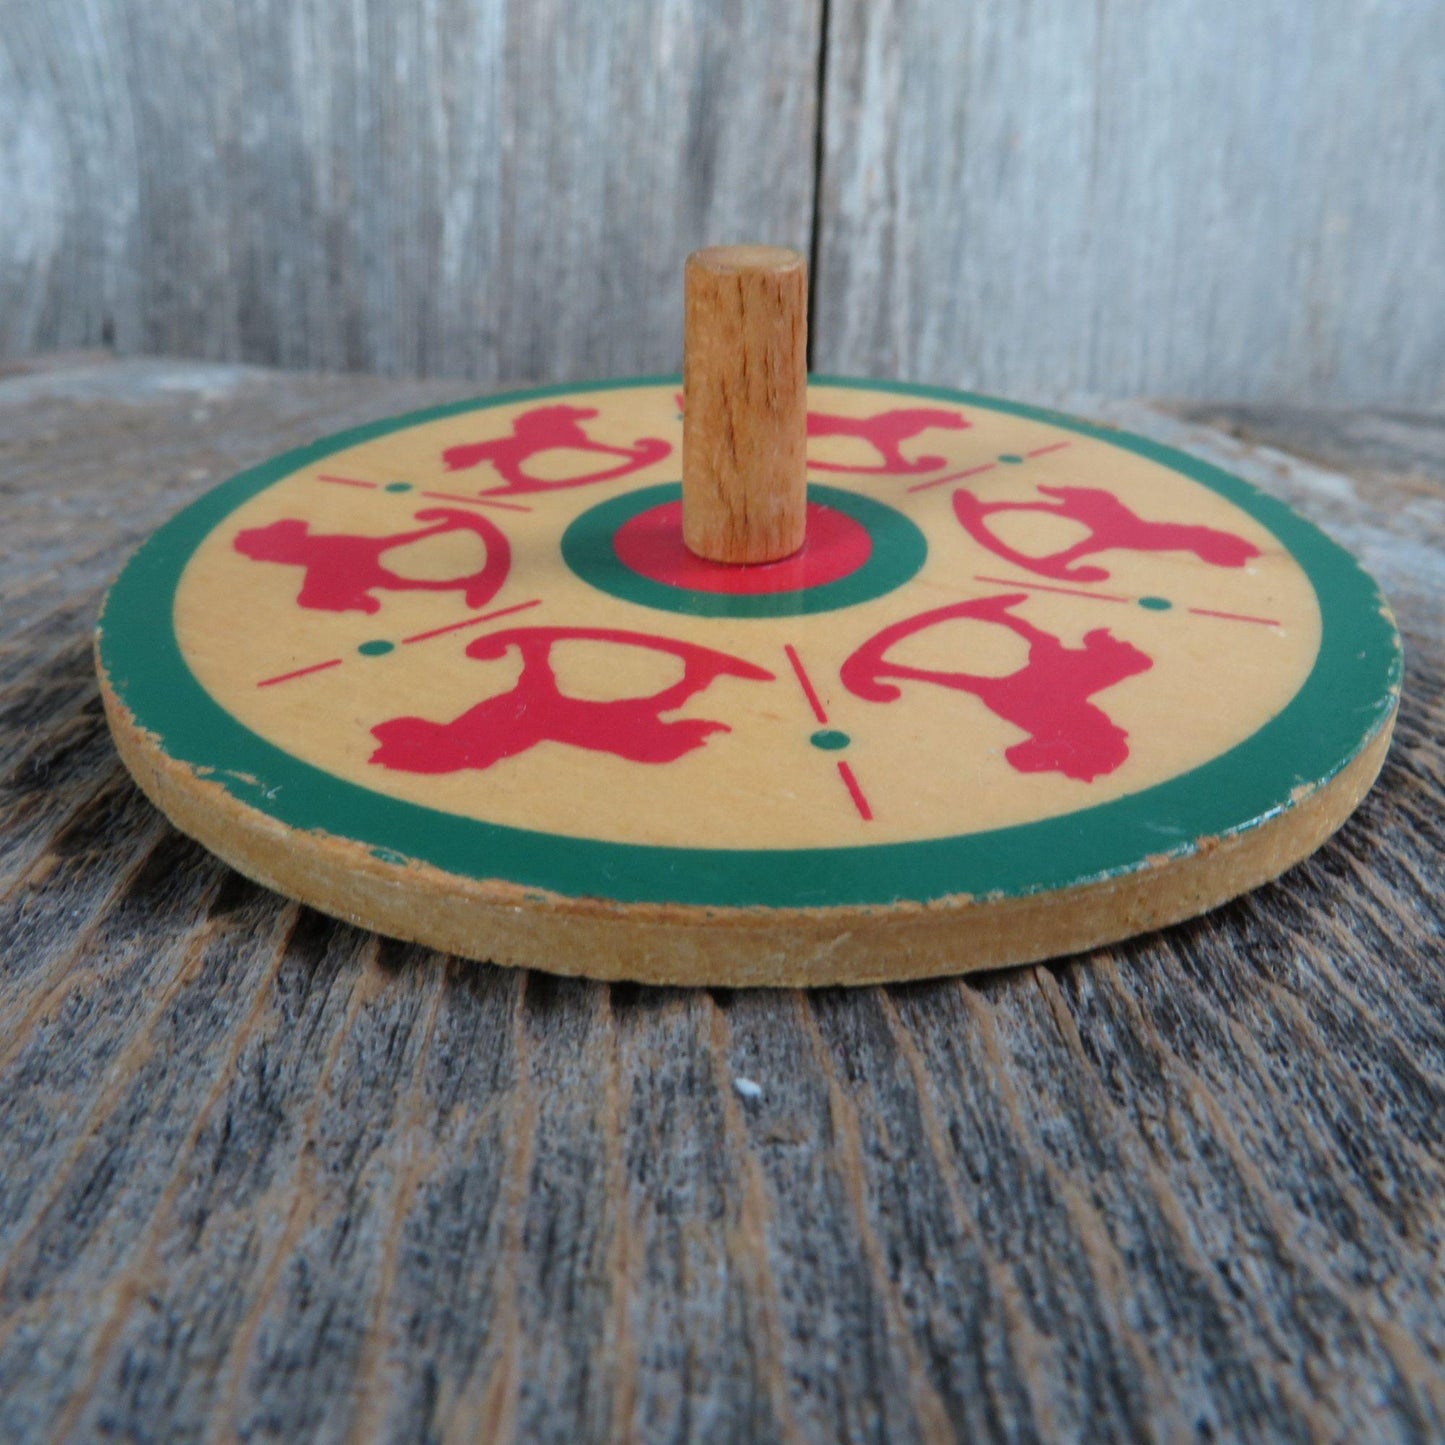 Vintage Spinning Top Wooden Toy Christmas Rocking Horse Dakin Green Red Toy 1991 Wood